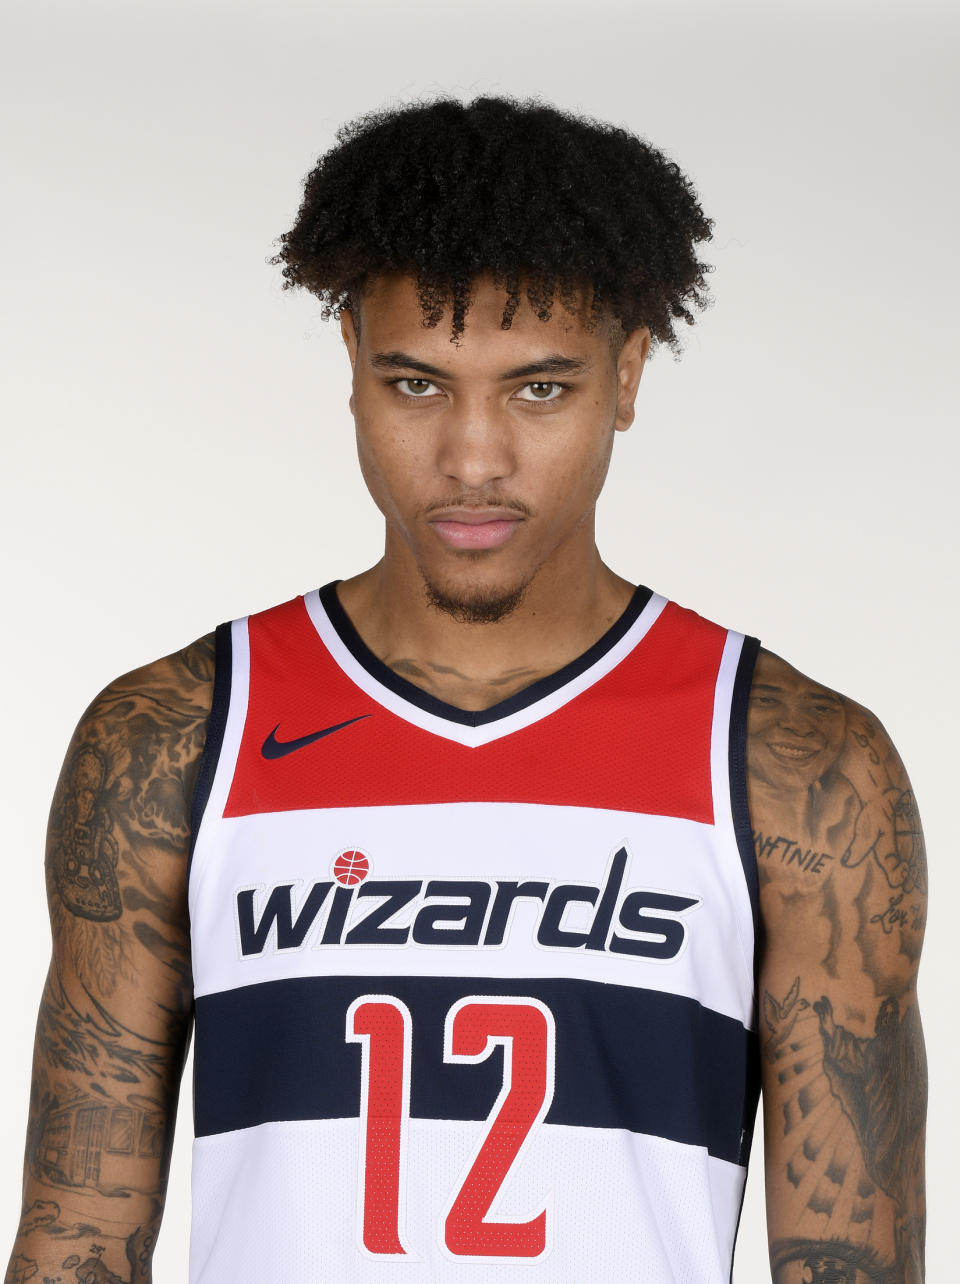 File-This photo taken Sept. 24, 2018, shows Washington Wizards forward Kelly Oubre Jr., posing for a photograph during an NBA basketball media day, in Washington. A person familiar with the deal says the Washington Wizards have an agreement in principle to acquire Trevor Ariza from the Phoenix Suns for Oubre Jr. and Austin Rivers. The person spoke to The Associated Press on condition of anonymity Saturday, Dec. 15, 2018, because it had not been announced by either team.(AP Photo/Nick Wass, File)